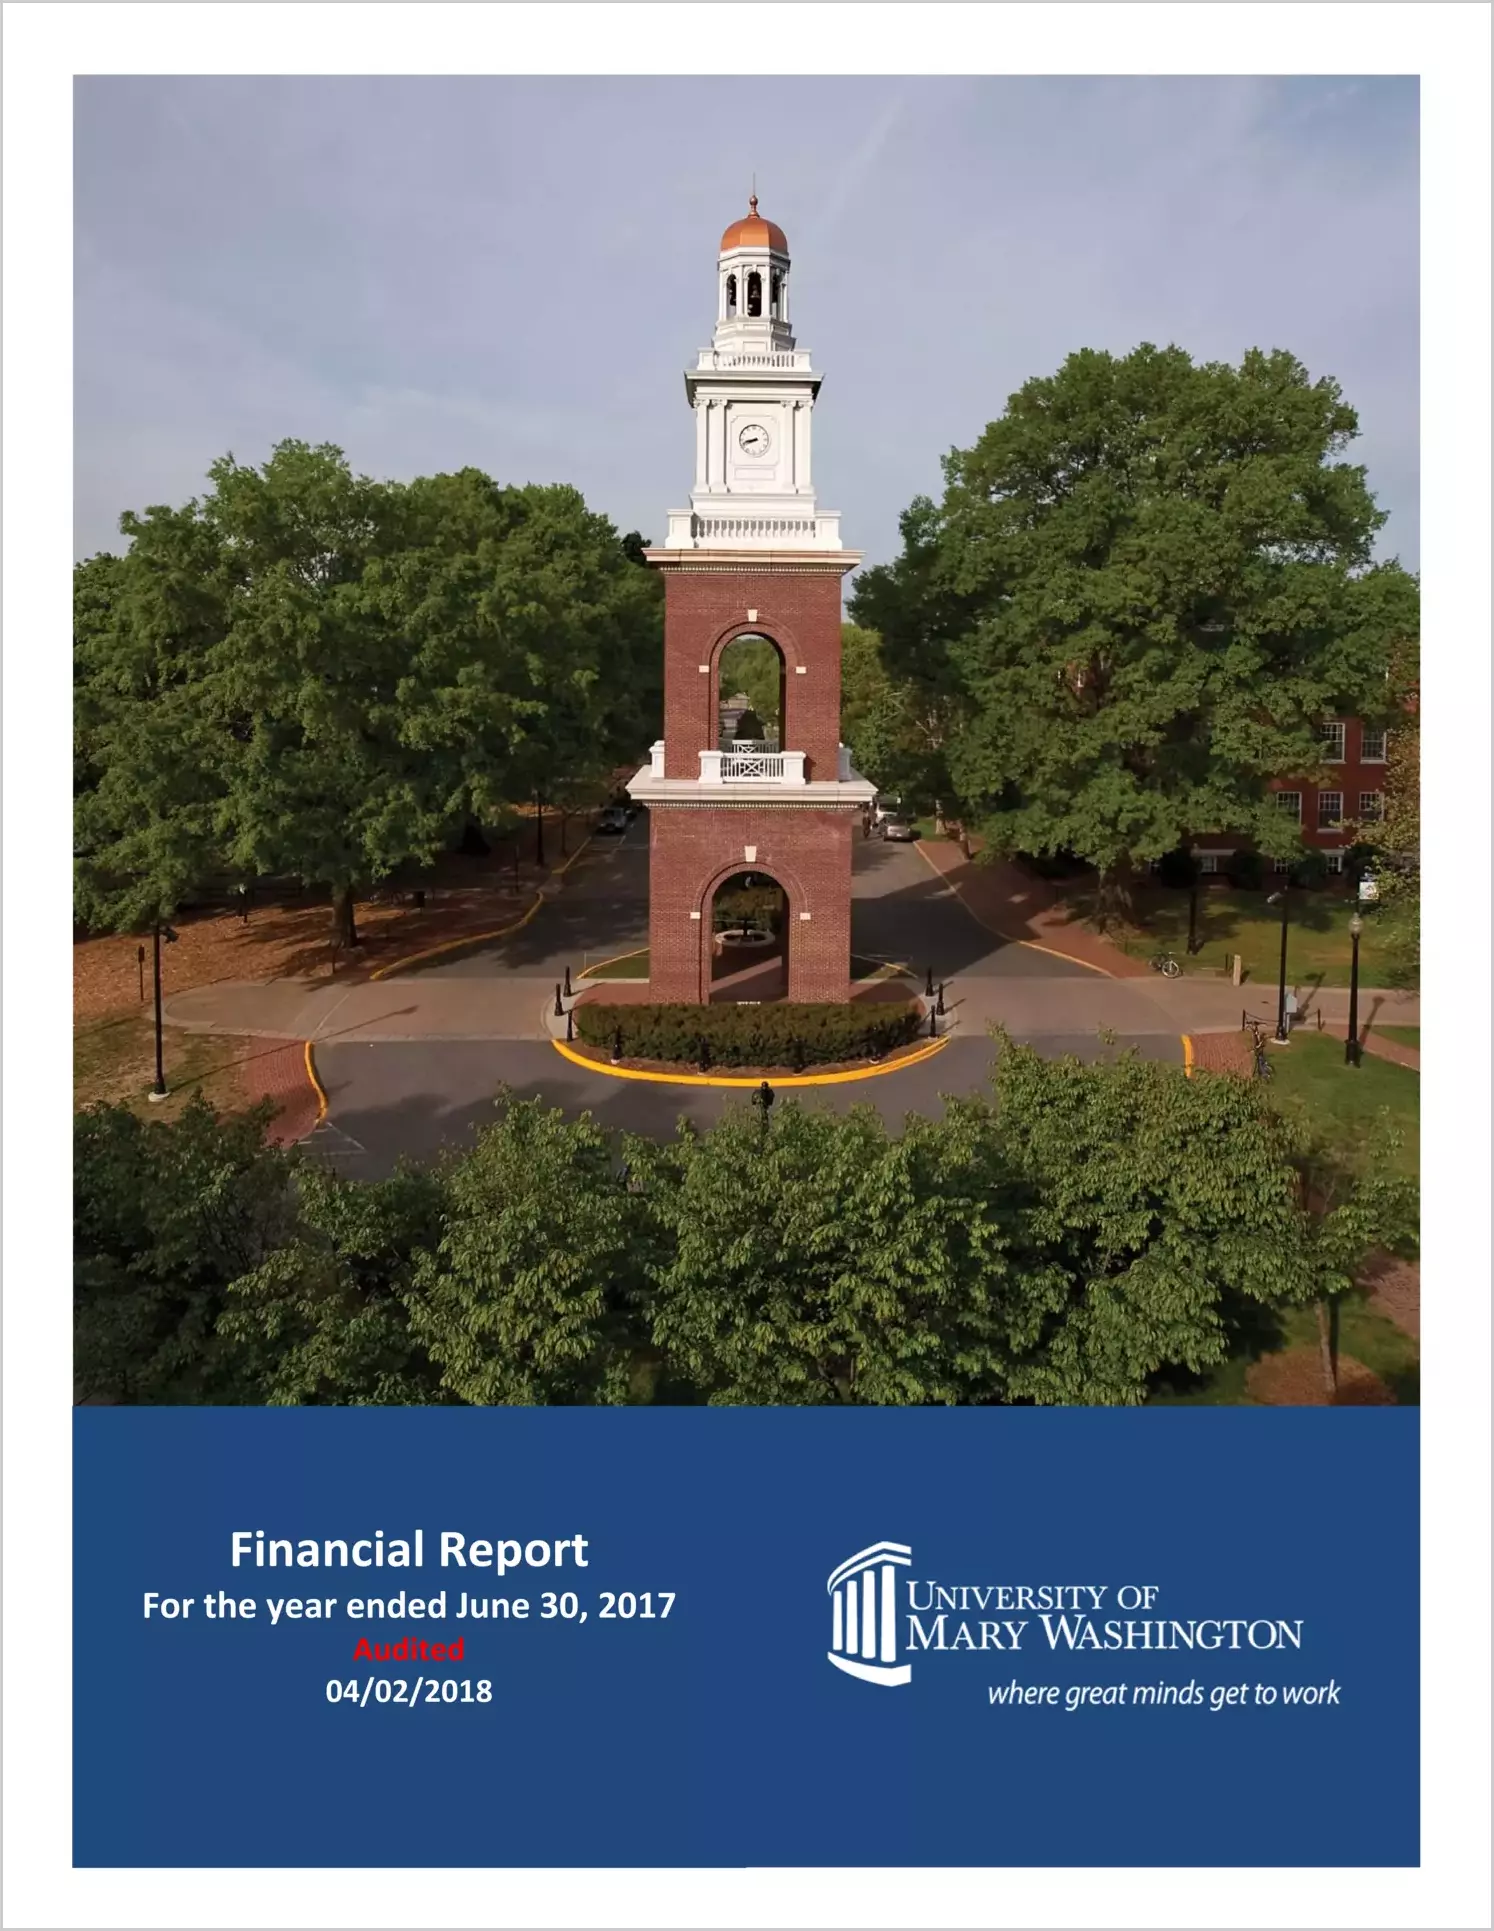 University of Mary Washington Financial Statements for the year ended June 30, 2017